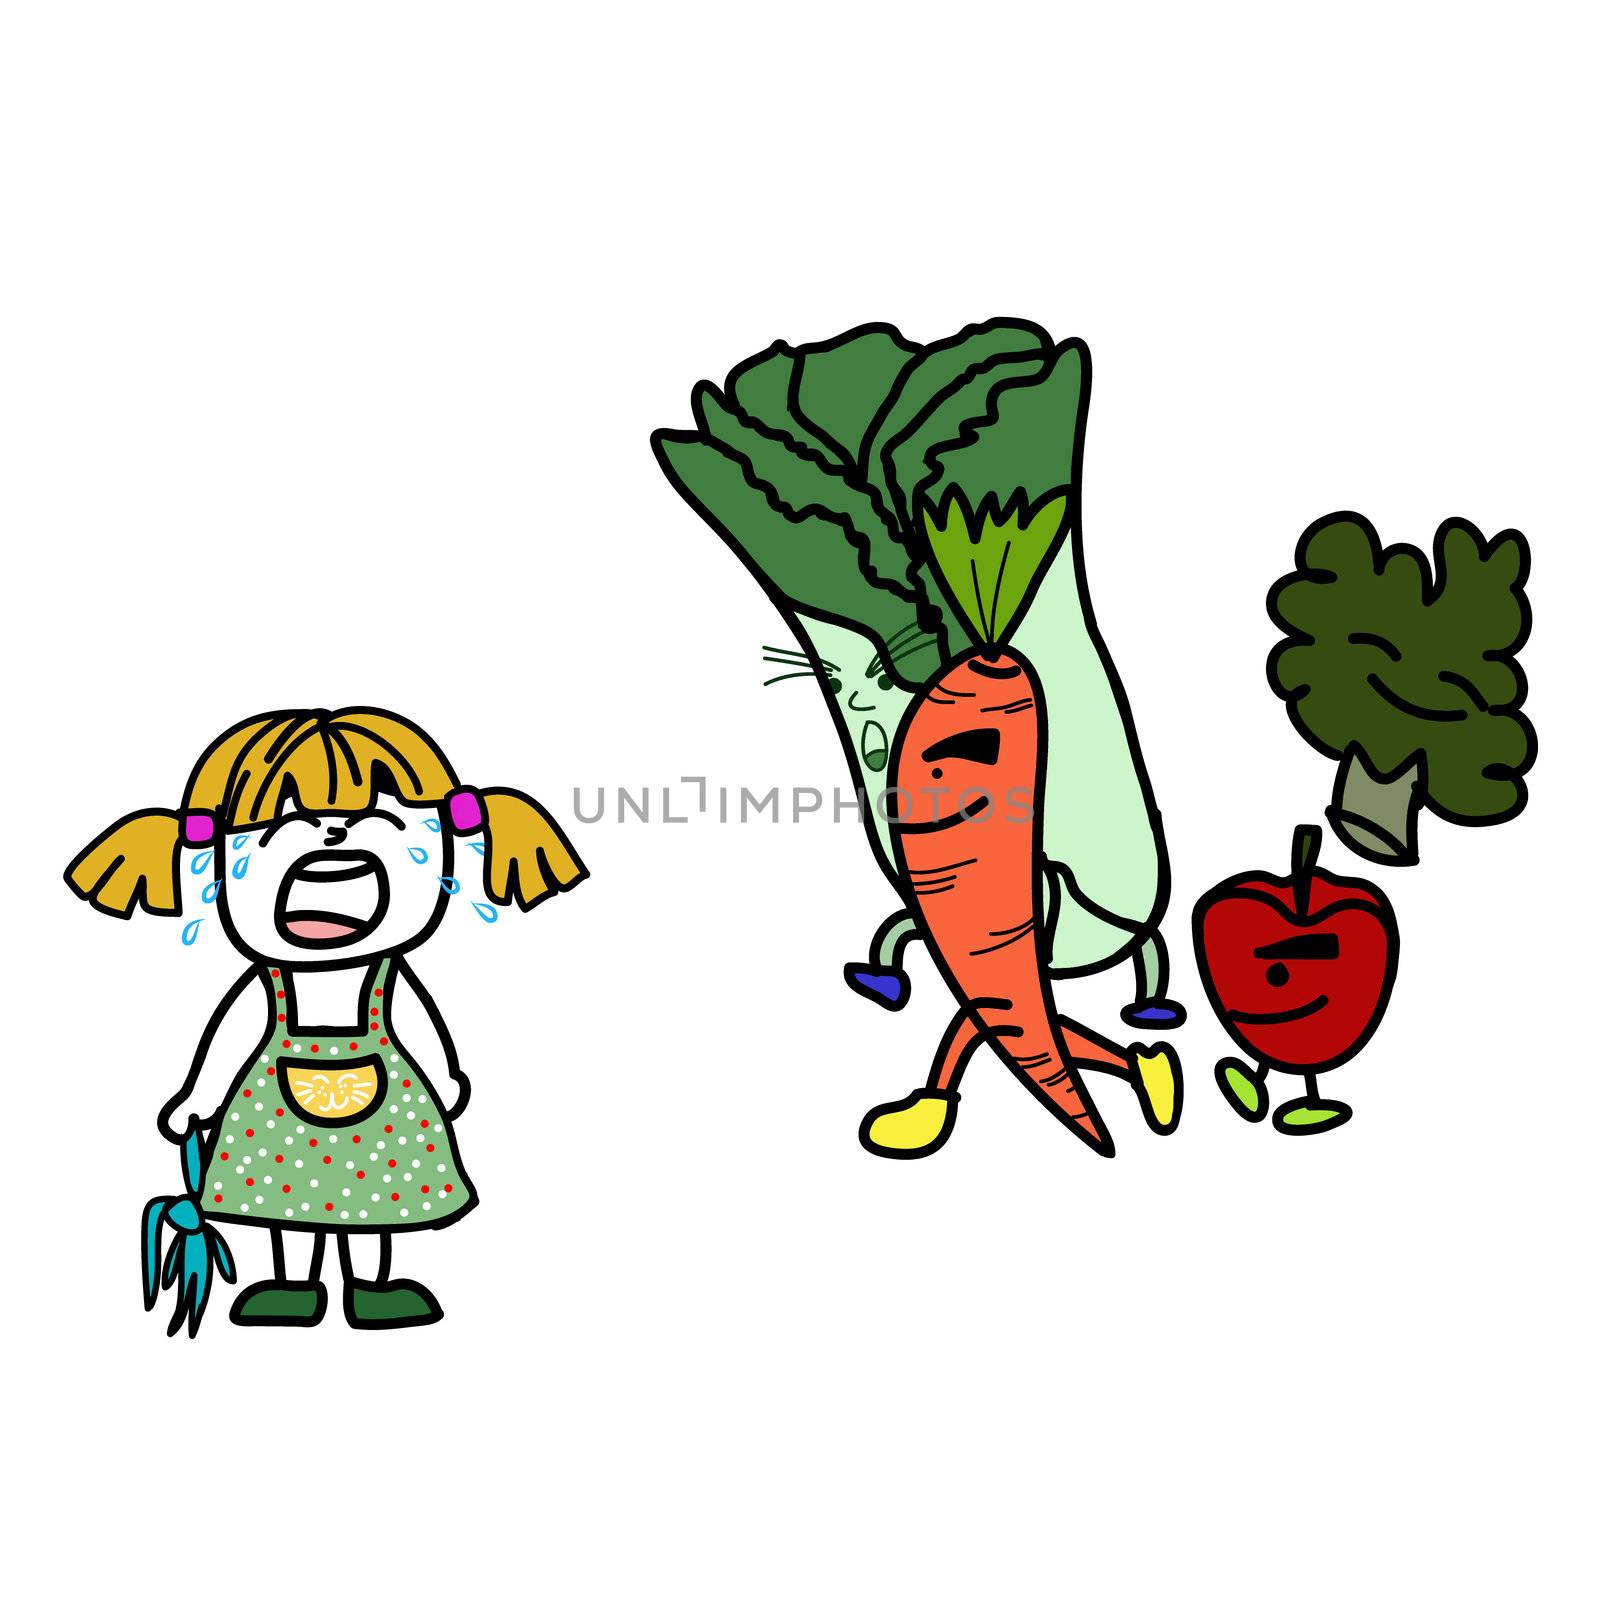 The little girl is crying because she does not to eat fruits and vegetables